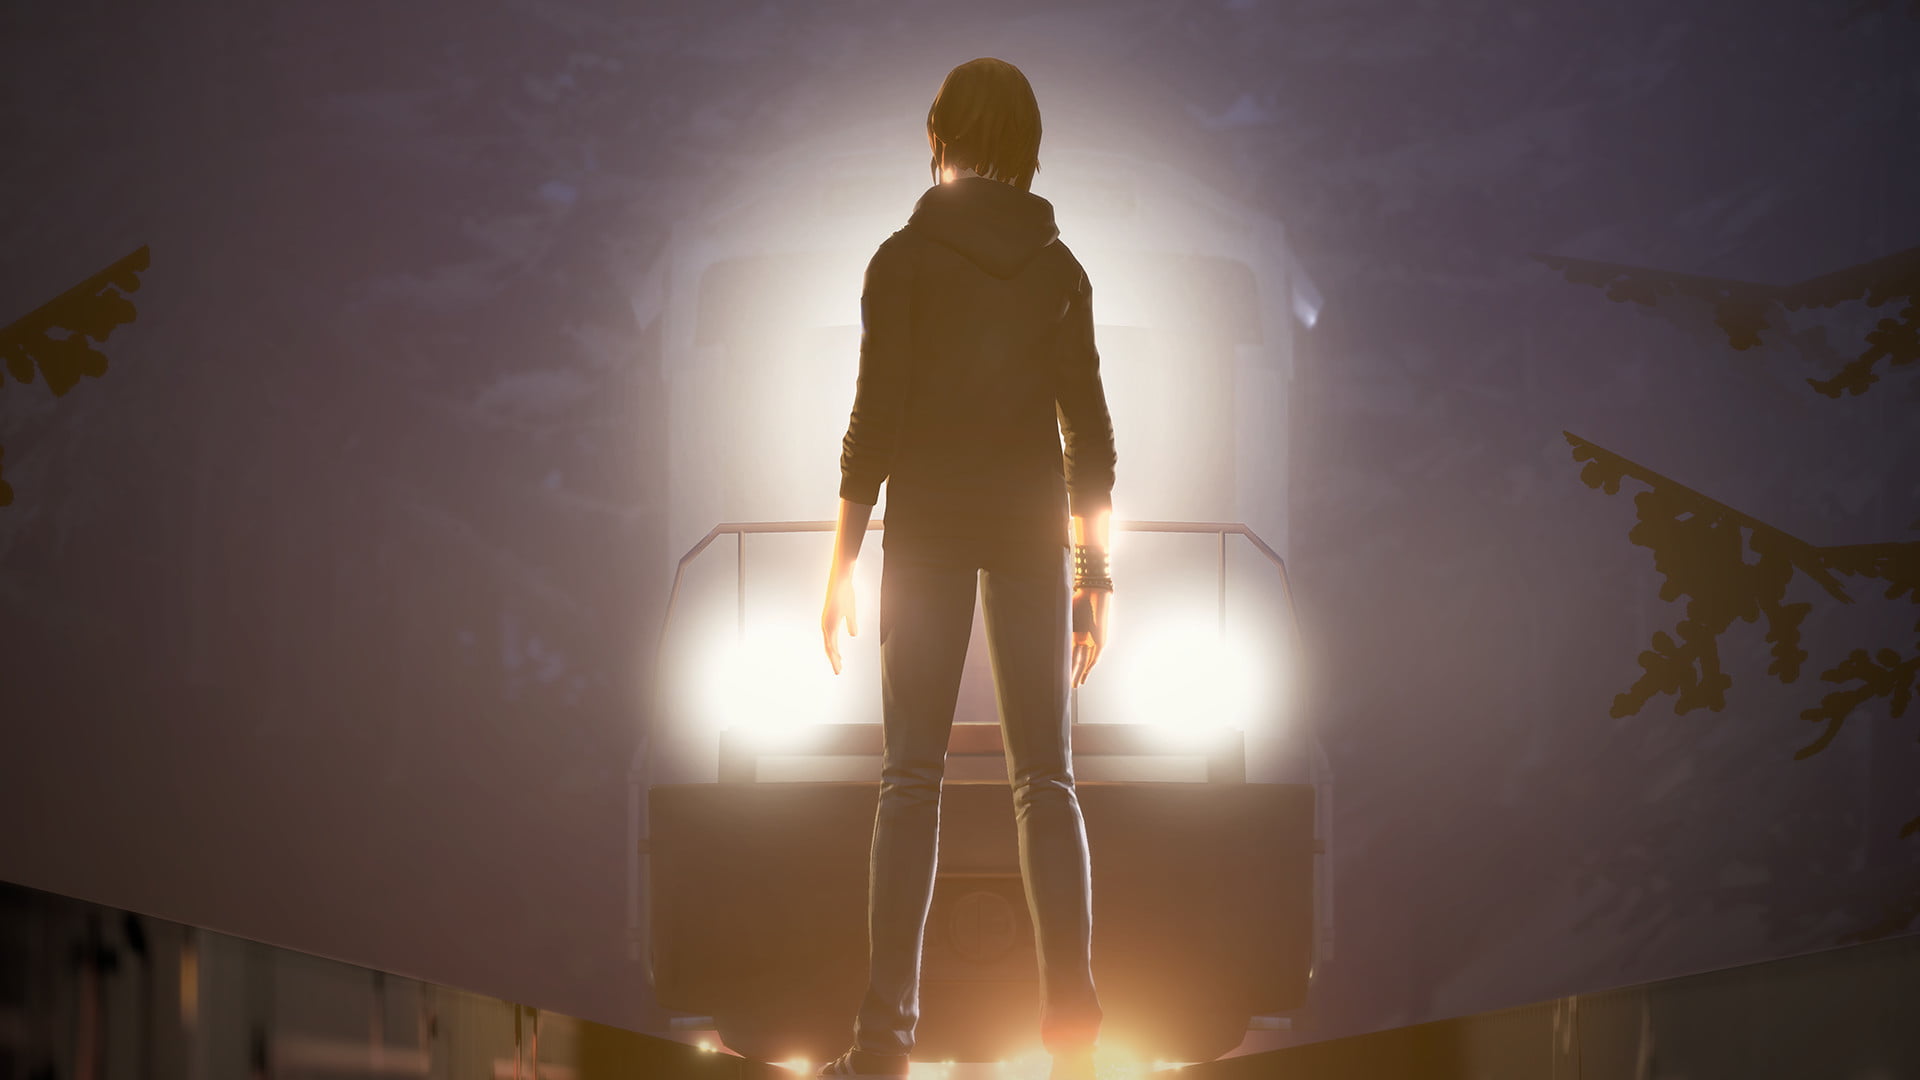 How Life Is Strange Before The Storm Creates A New World With